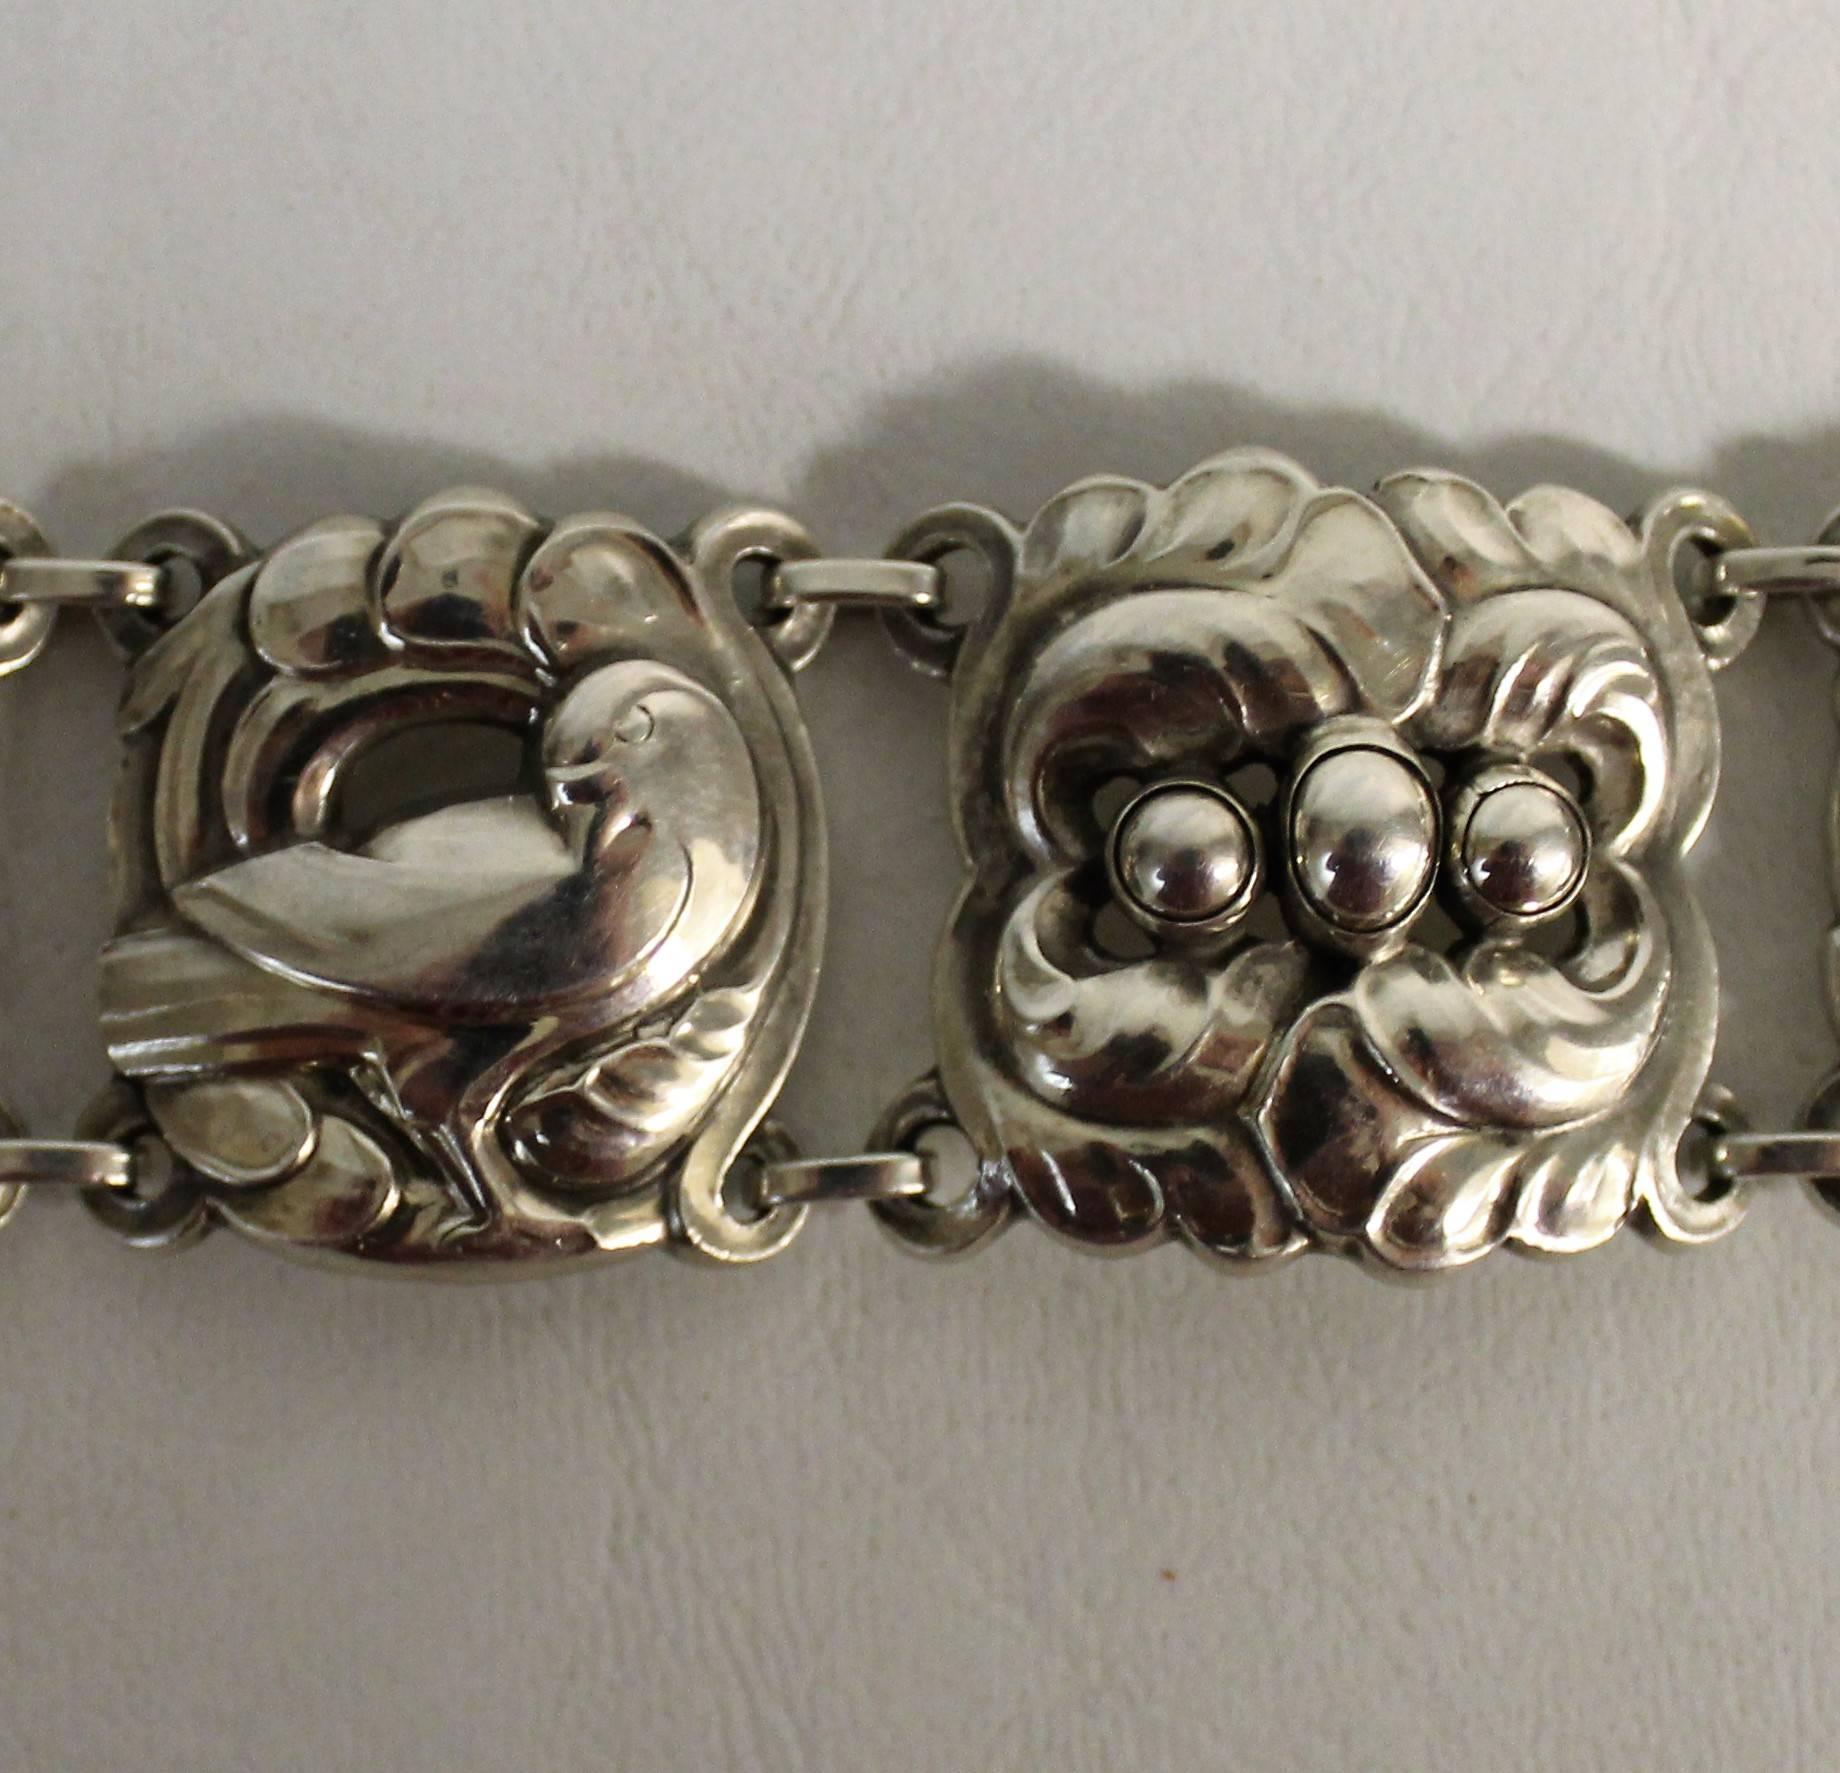 This superb bracelet made in sterling silver with alternating links of doves and eggs in nests. This is a Classic Danish Georg Jensen design with Art Nouveau influences. It has a wonderful, hidden, tongue and groove catch with a fold-over catch for